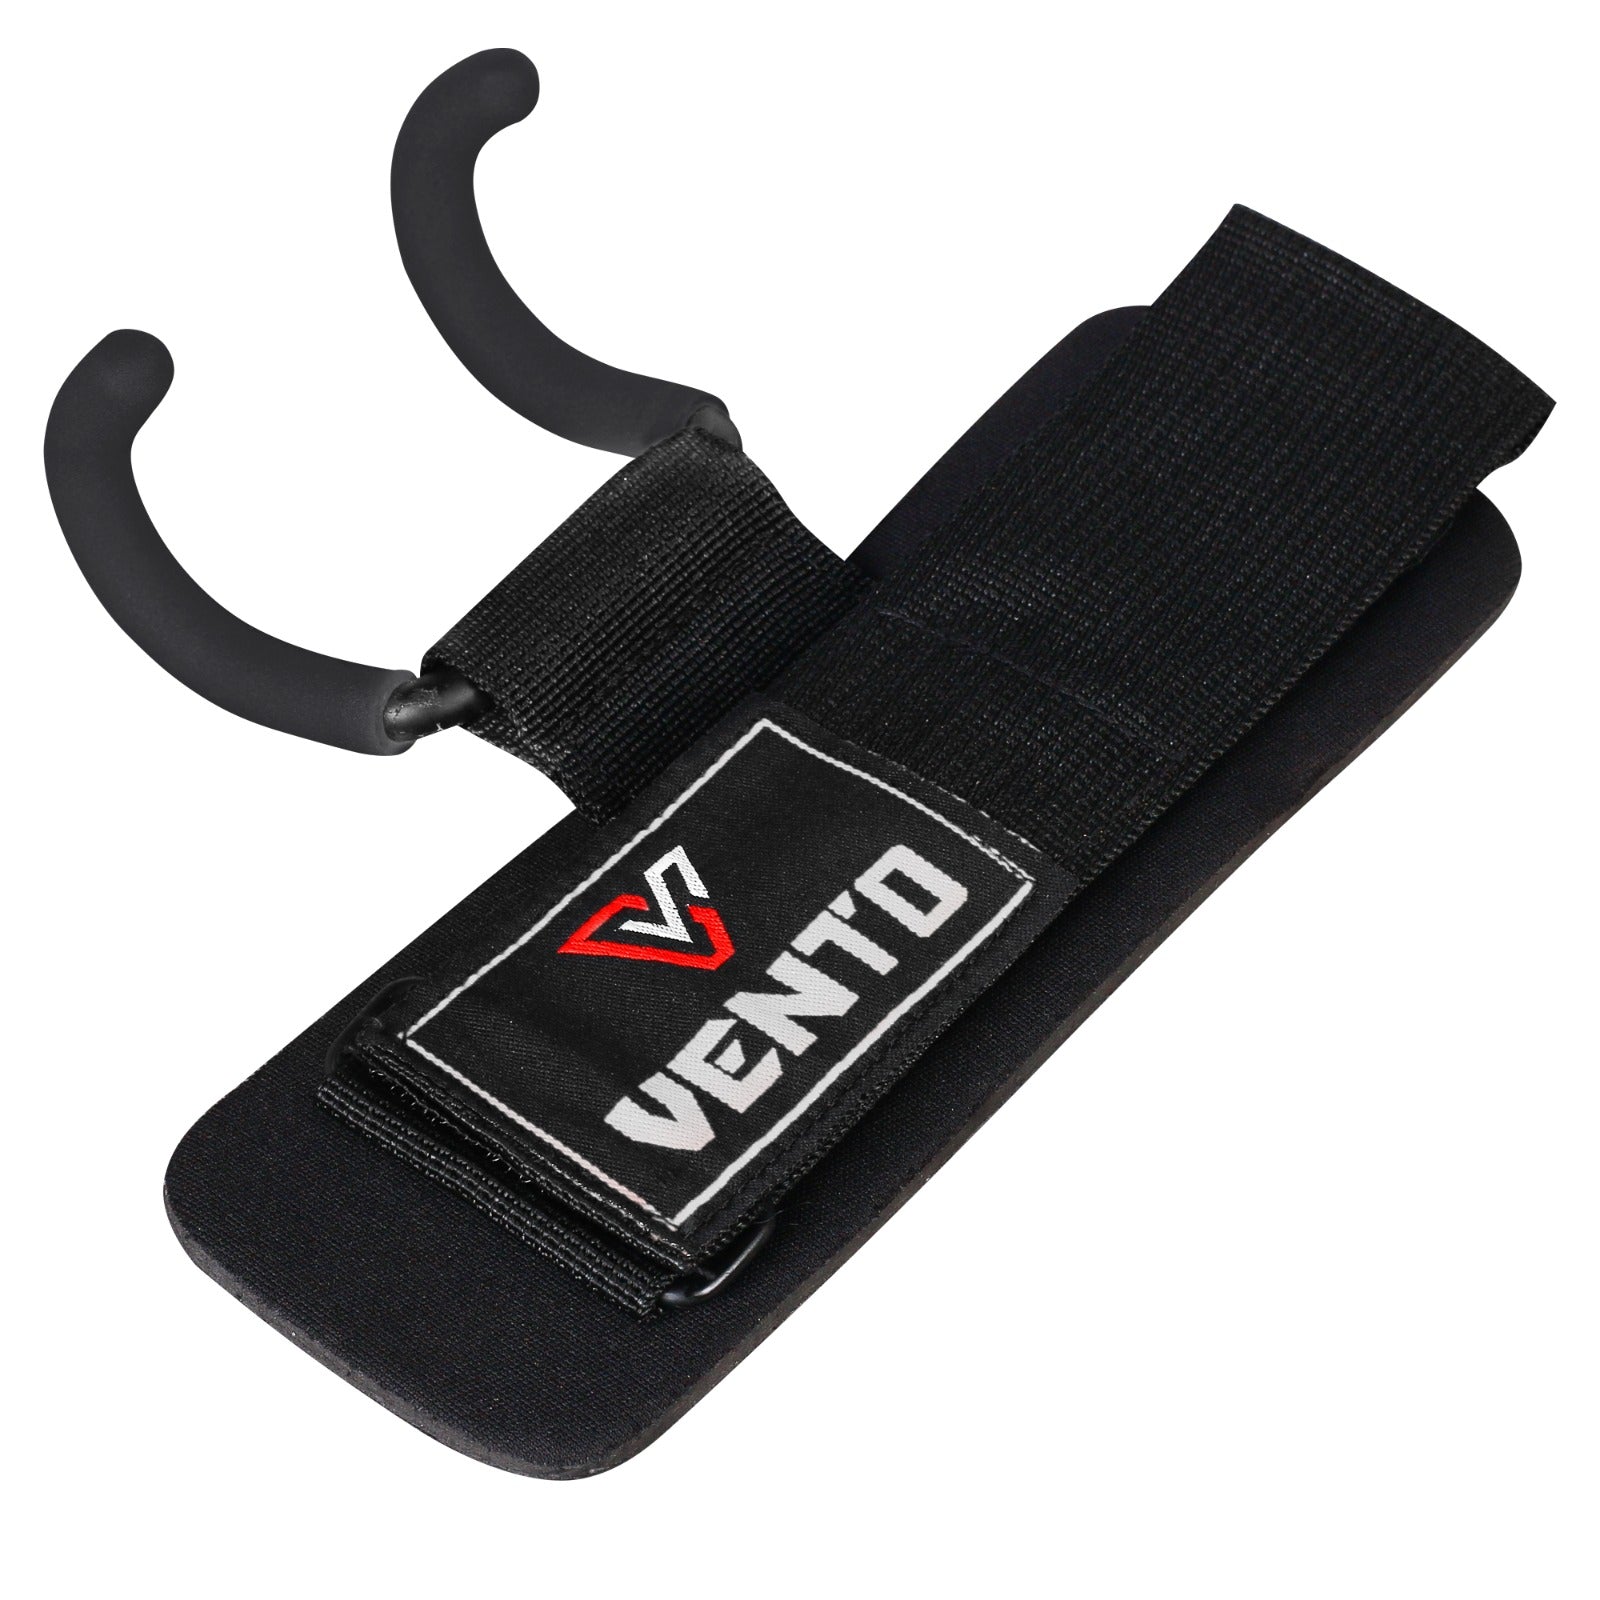 Vento weight lifting hook